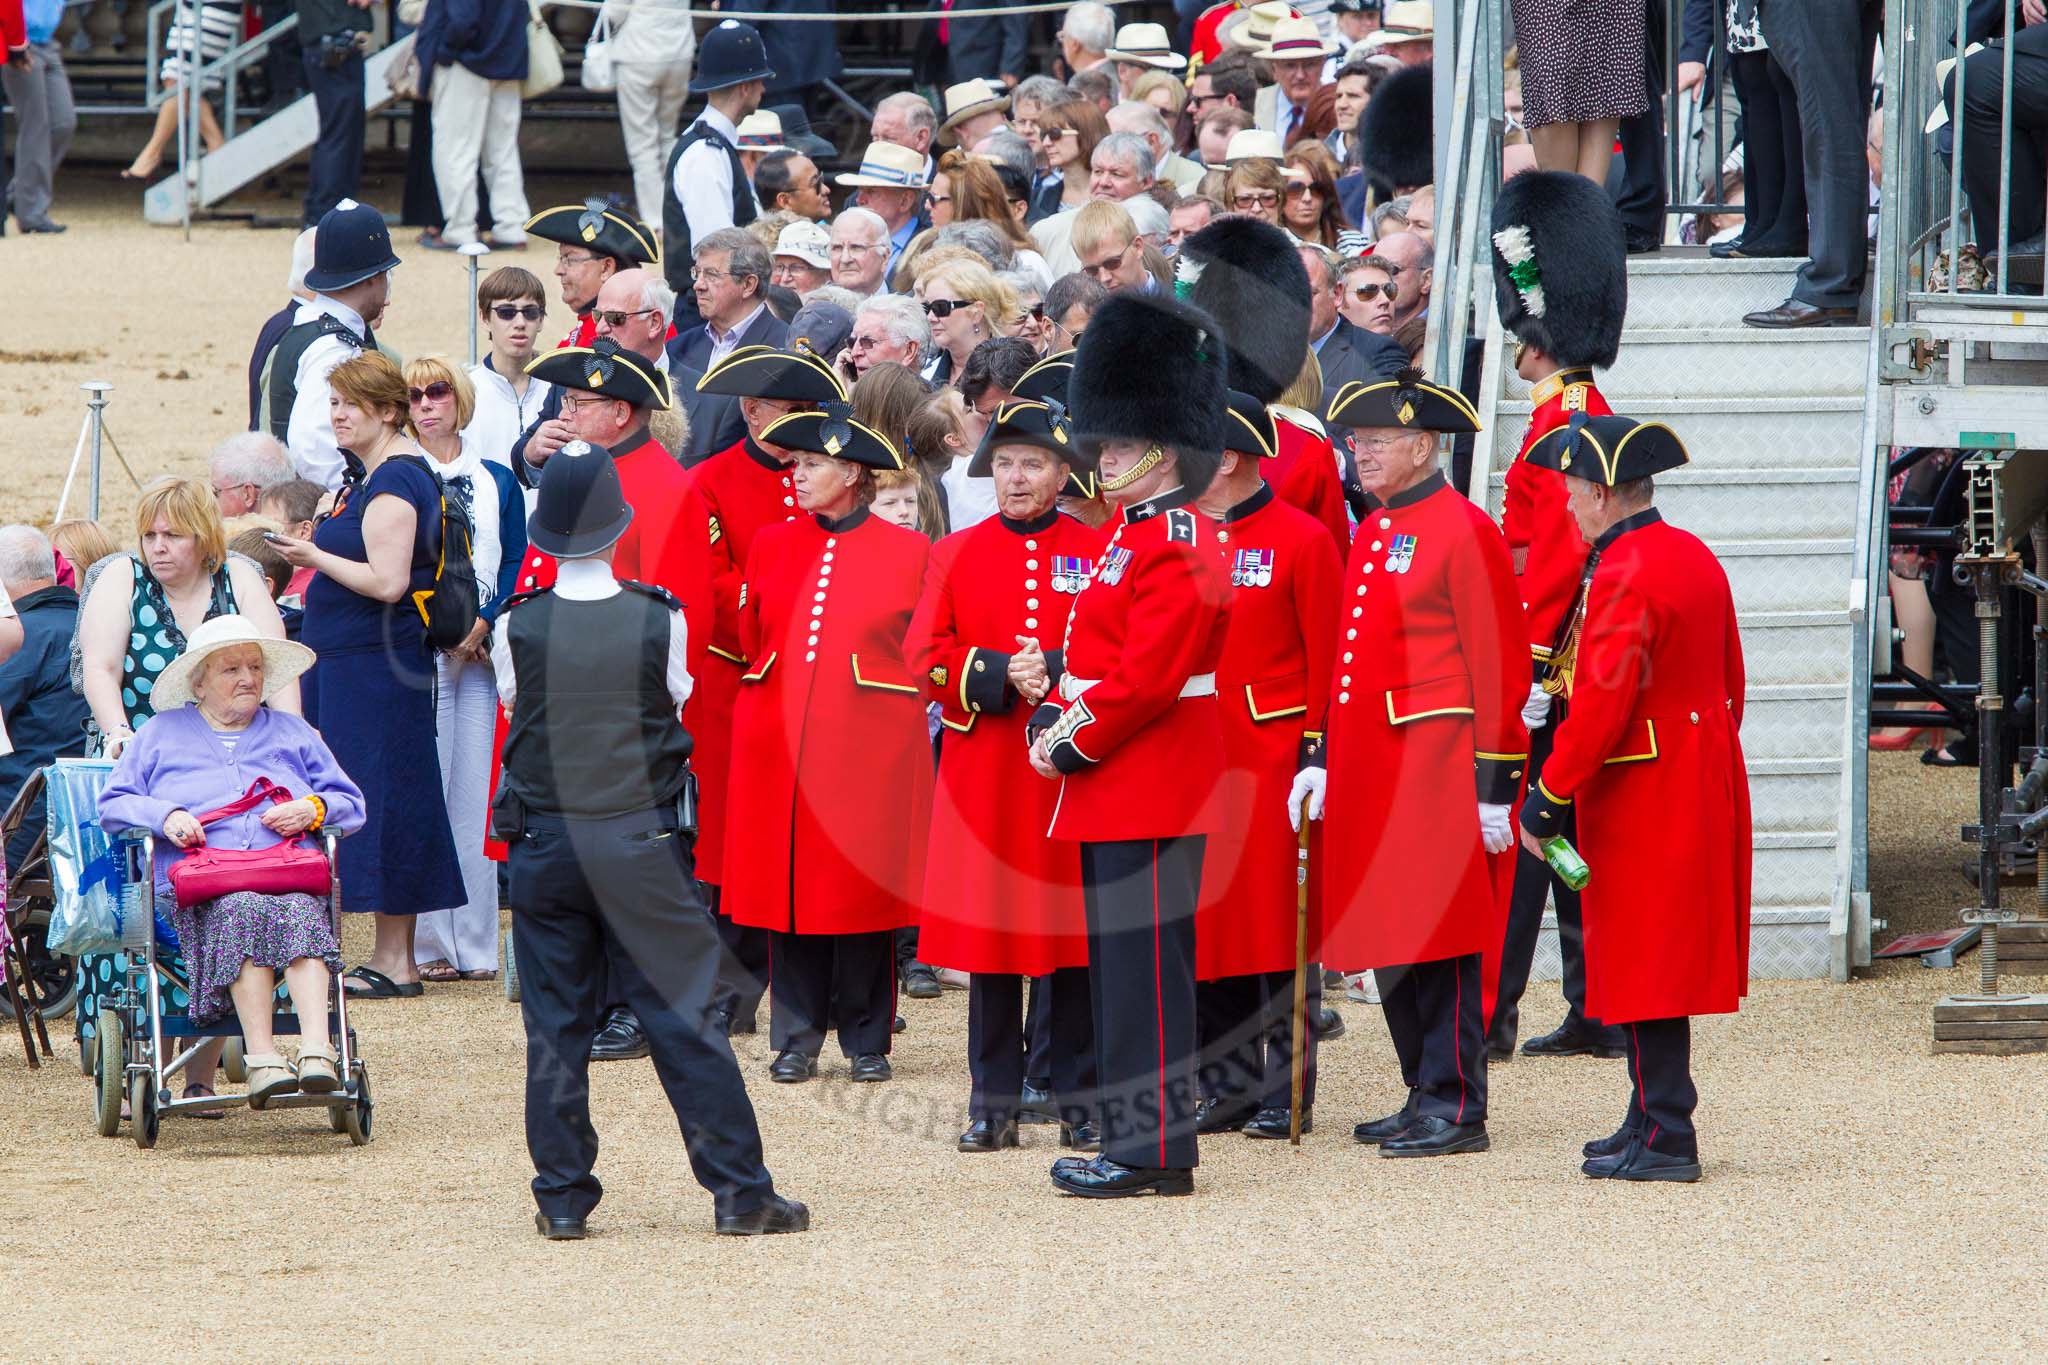 The Colonel's Review 2013.
Horse Guards Parade, Westminster,
London SW1,

United Kingdom,
on 08 June 2013 at 12:14, image #881